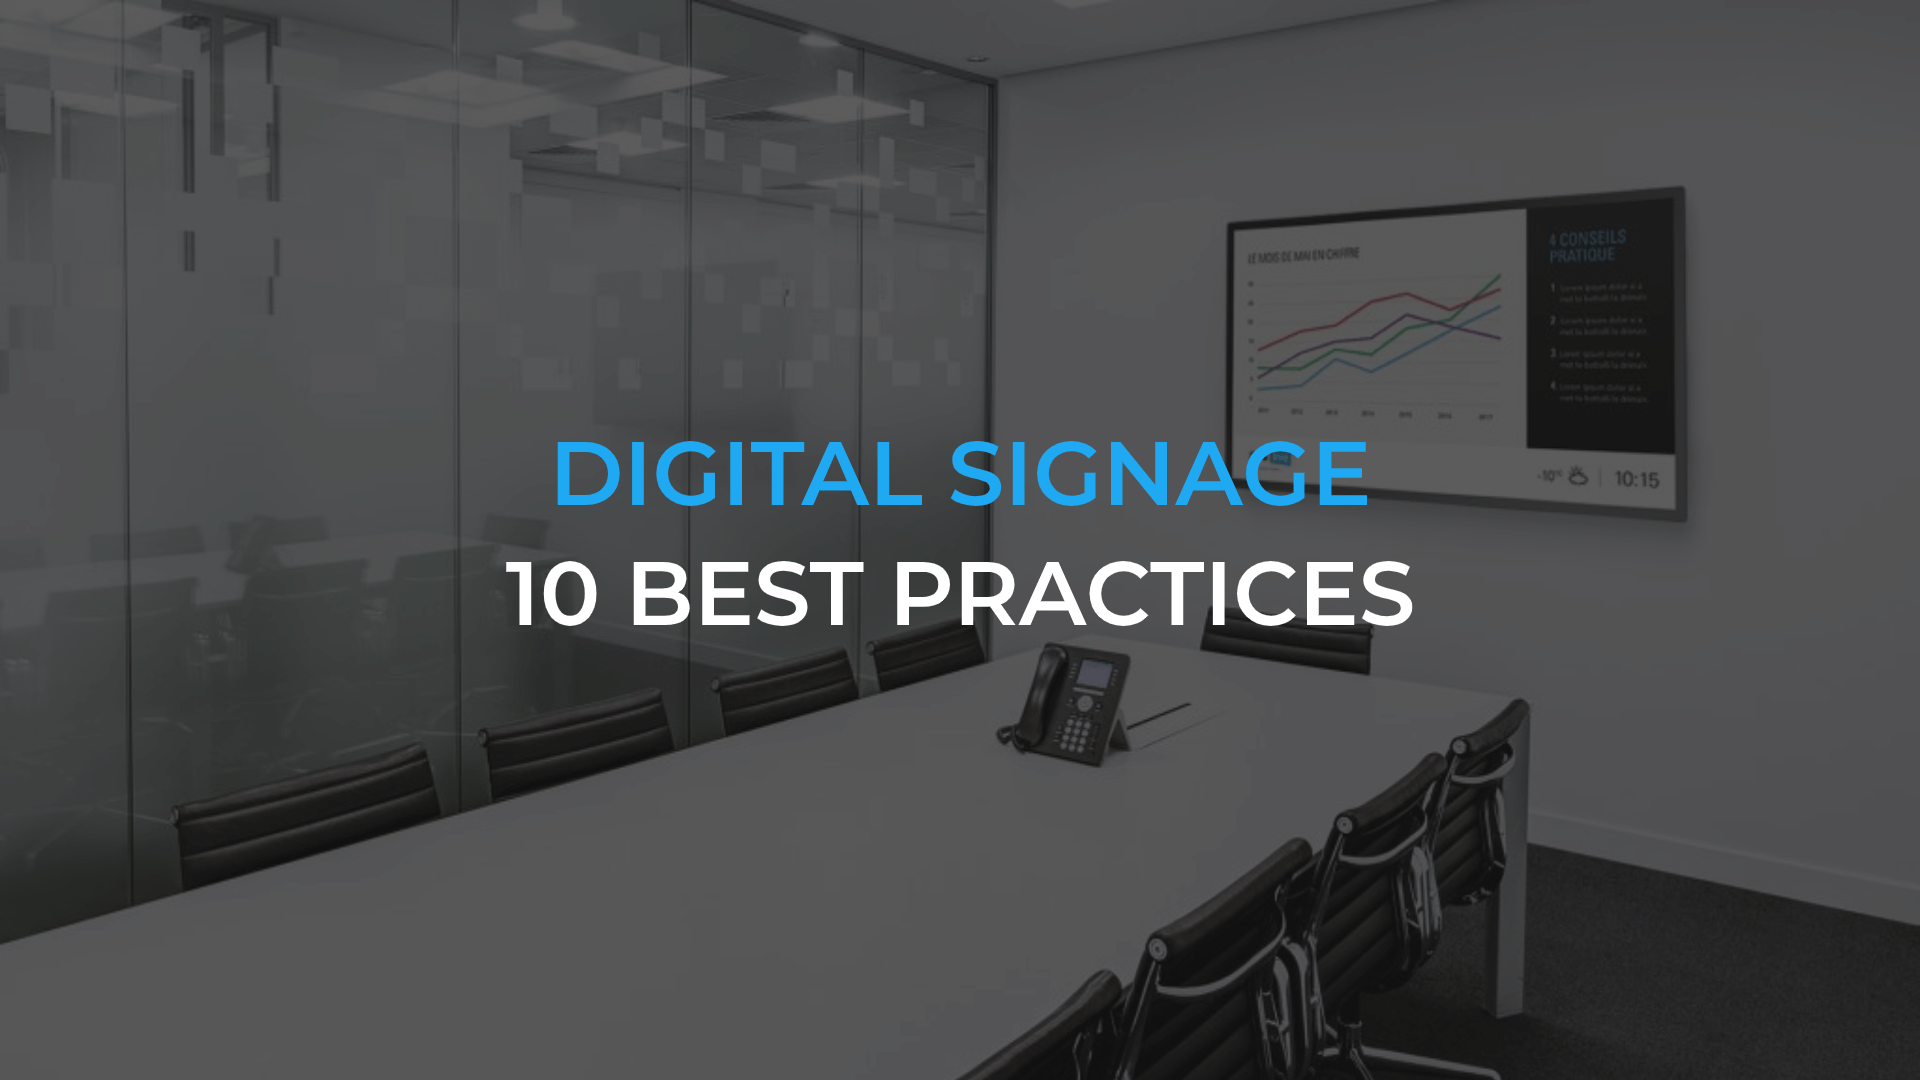 Digital signage: Top 10 best practices in content creation for internal communications